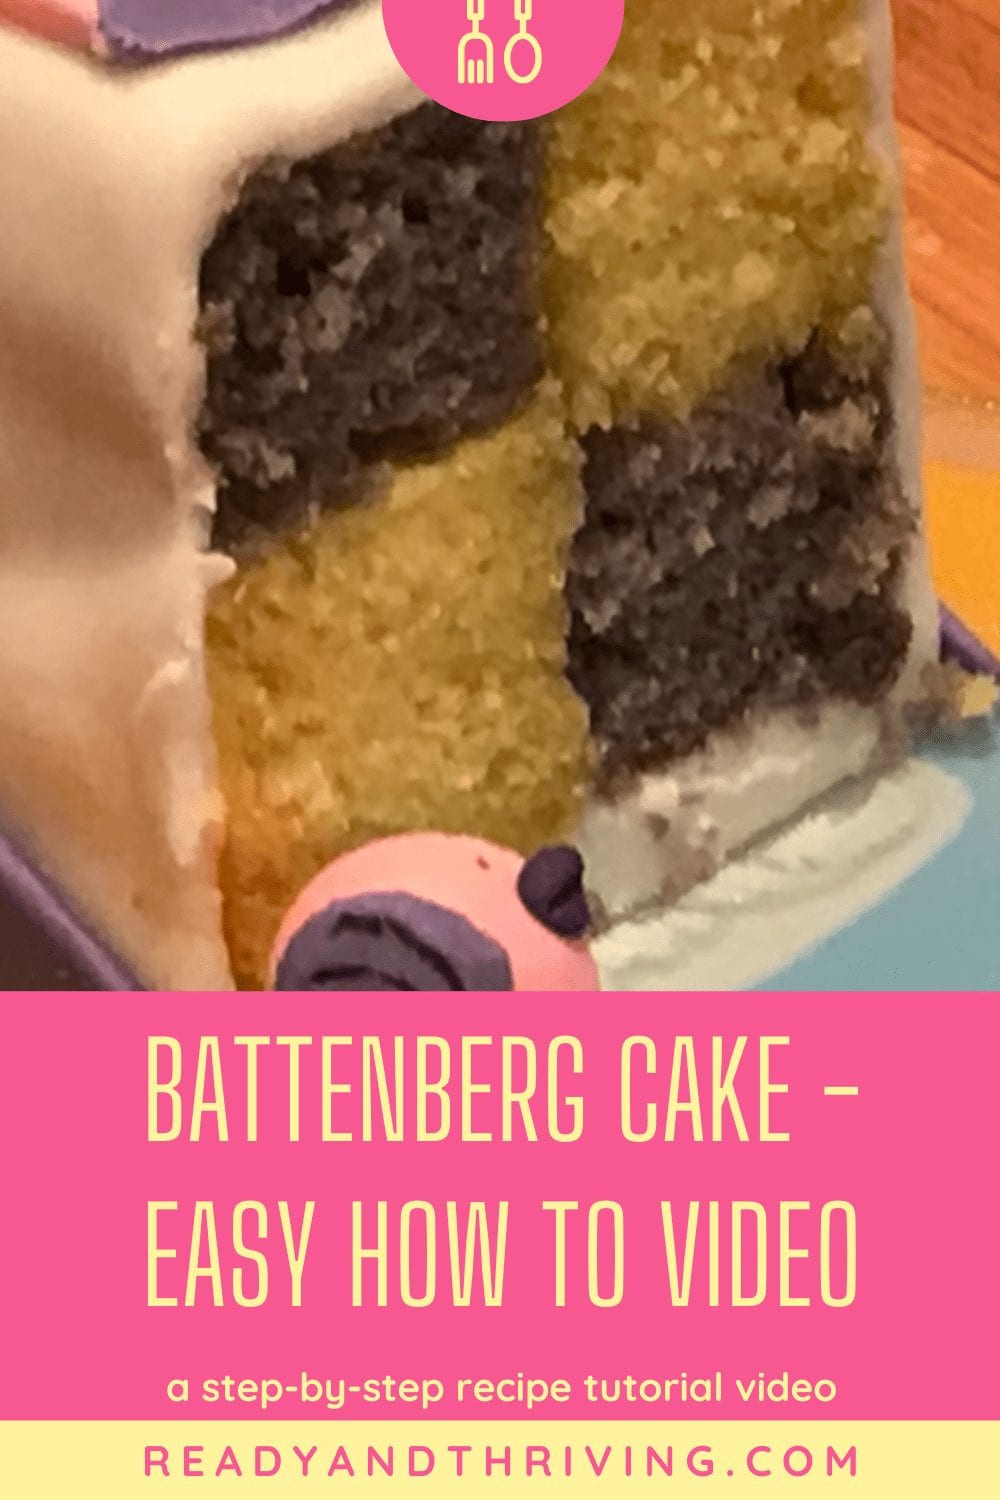 https://readyandthriving.com/wp-content/uploads/2021/01/Battenberg-cake-from-cake-mix-from-pantry-VIDEO-1.jpg